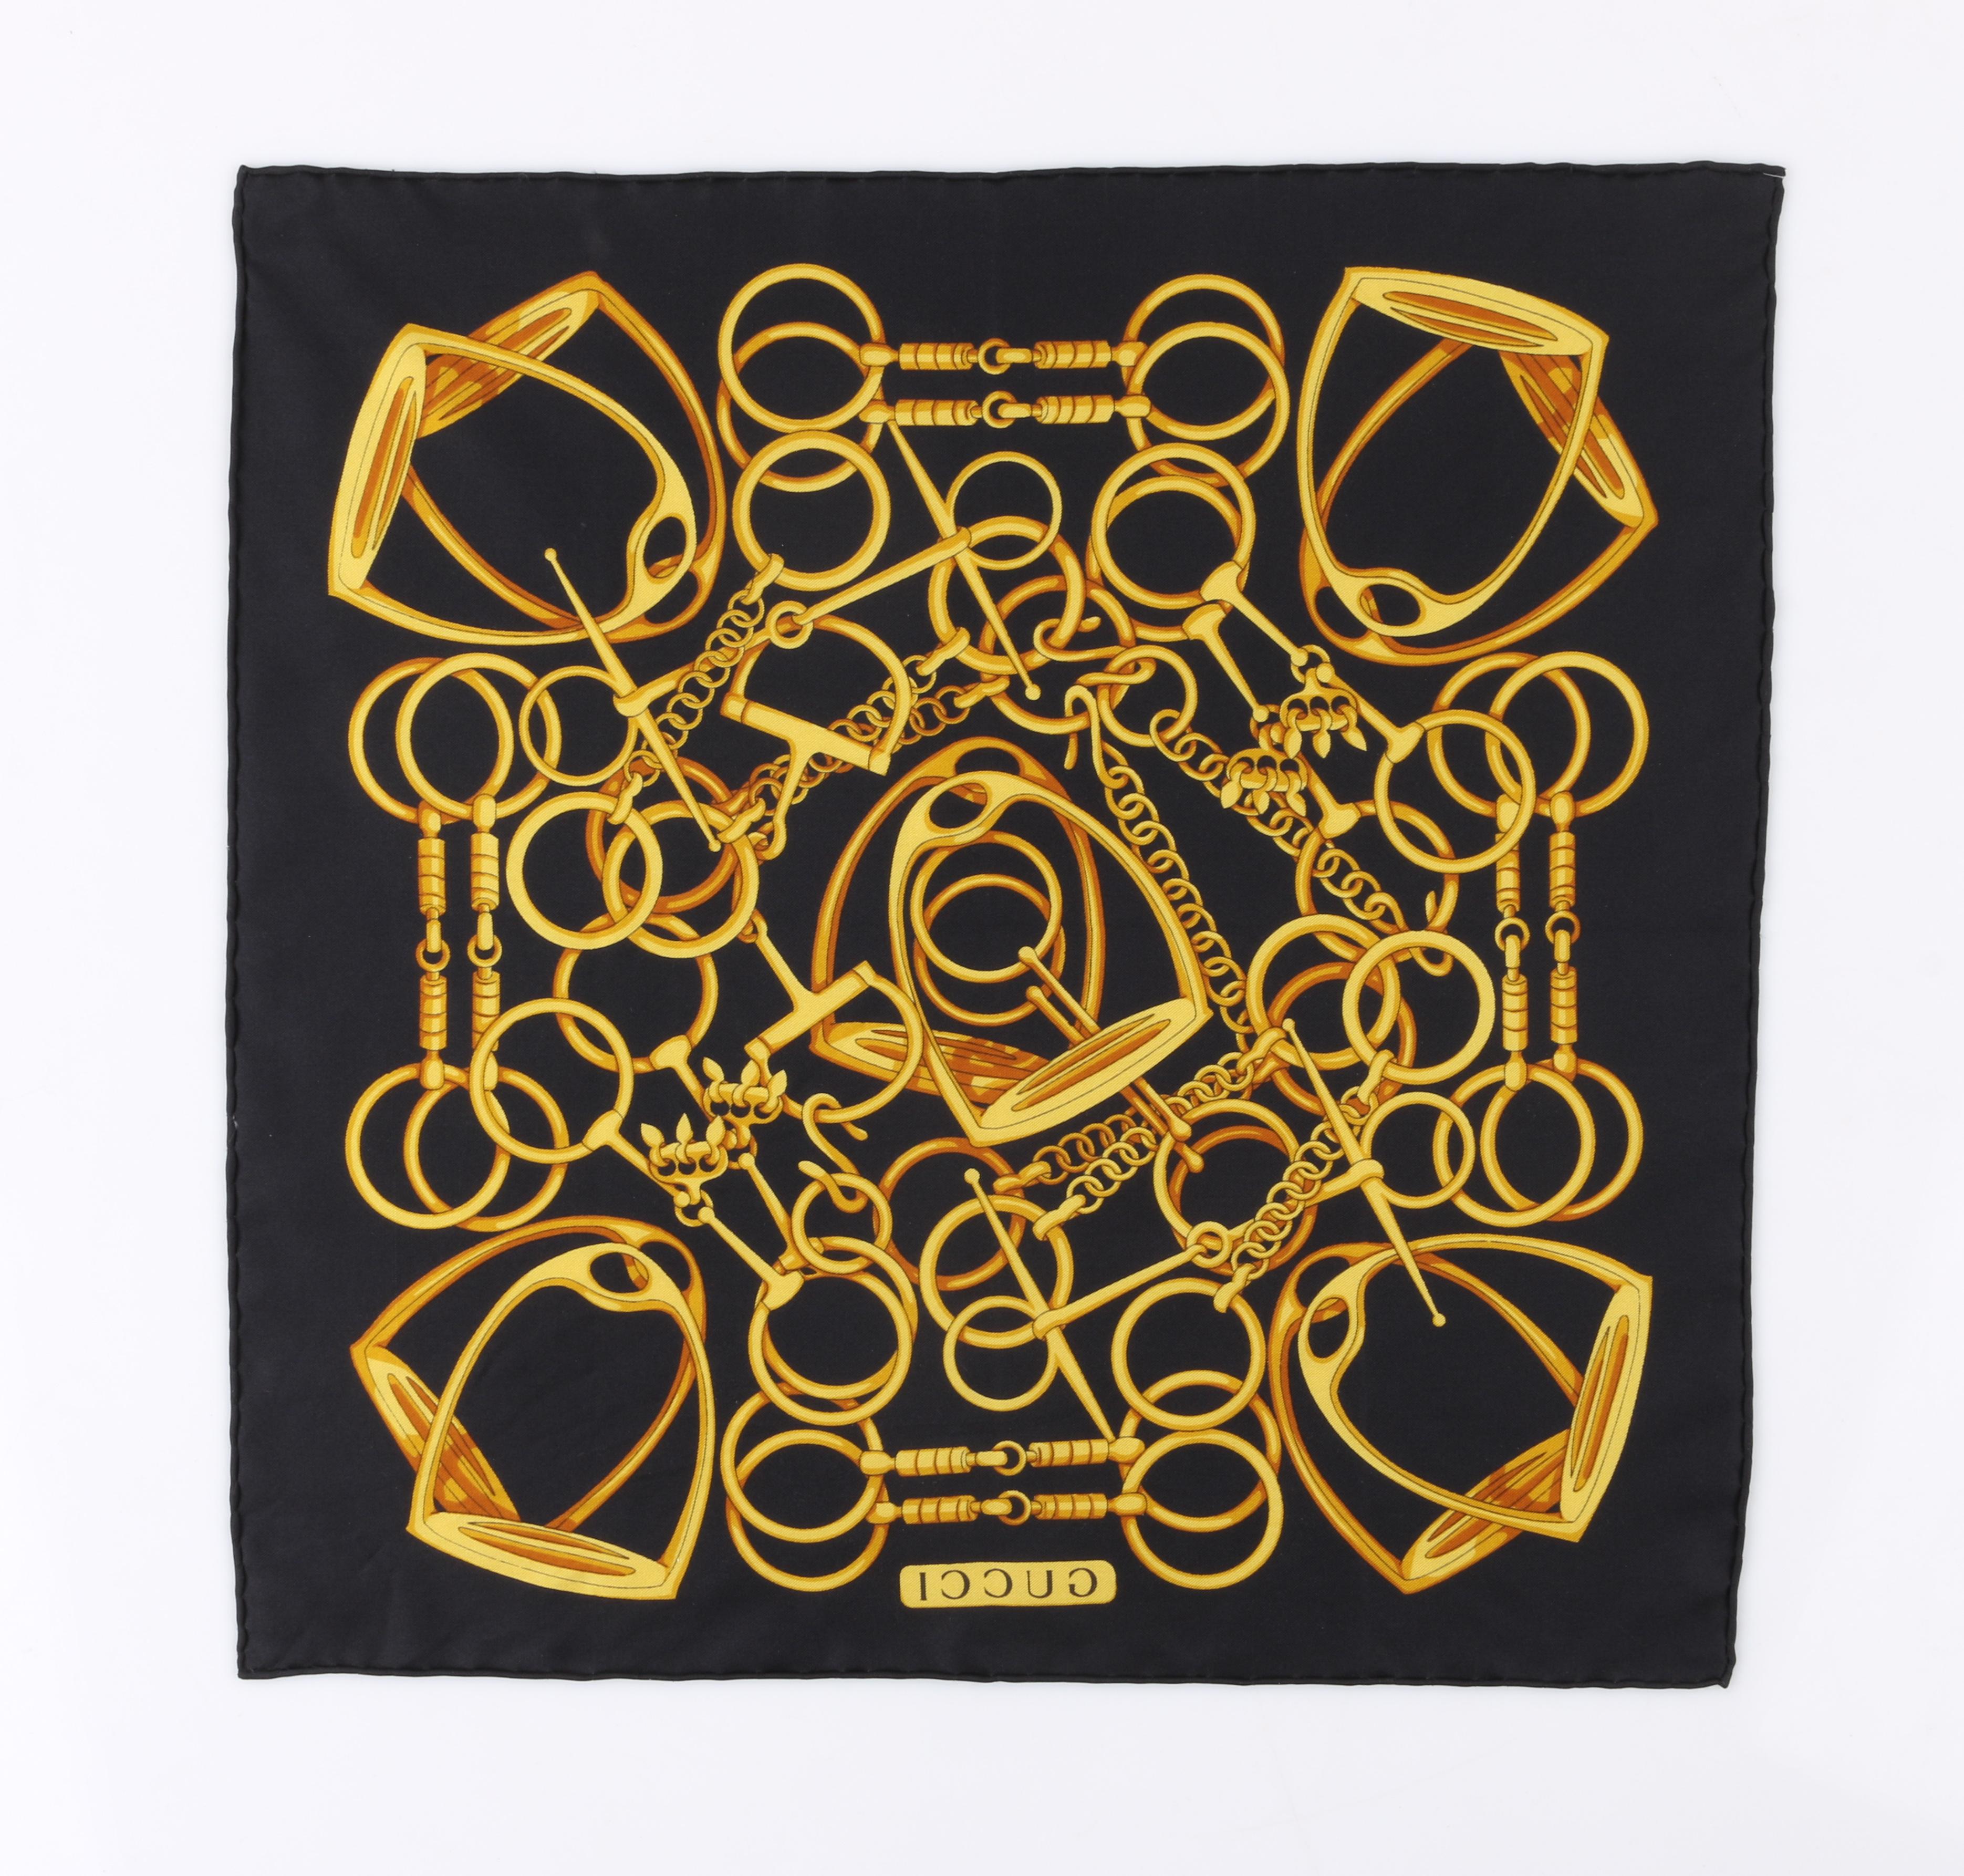 DESCRIPTION: GUCCI Black & Gold Equestrian Horsebit Stirrup Print Silk Scarf / Handkerchief 
 
Brand / Manufacturer: Gucci
Collection: 
Designer: 
Manufacturer Style Name: 
Style: Silk scarf
Color(s): Multi in shades of black and gold
Lined: